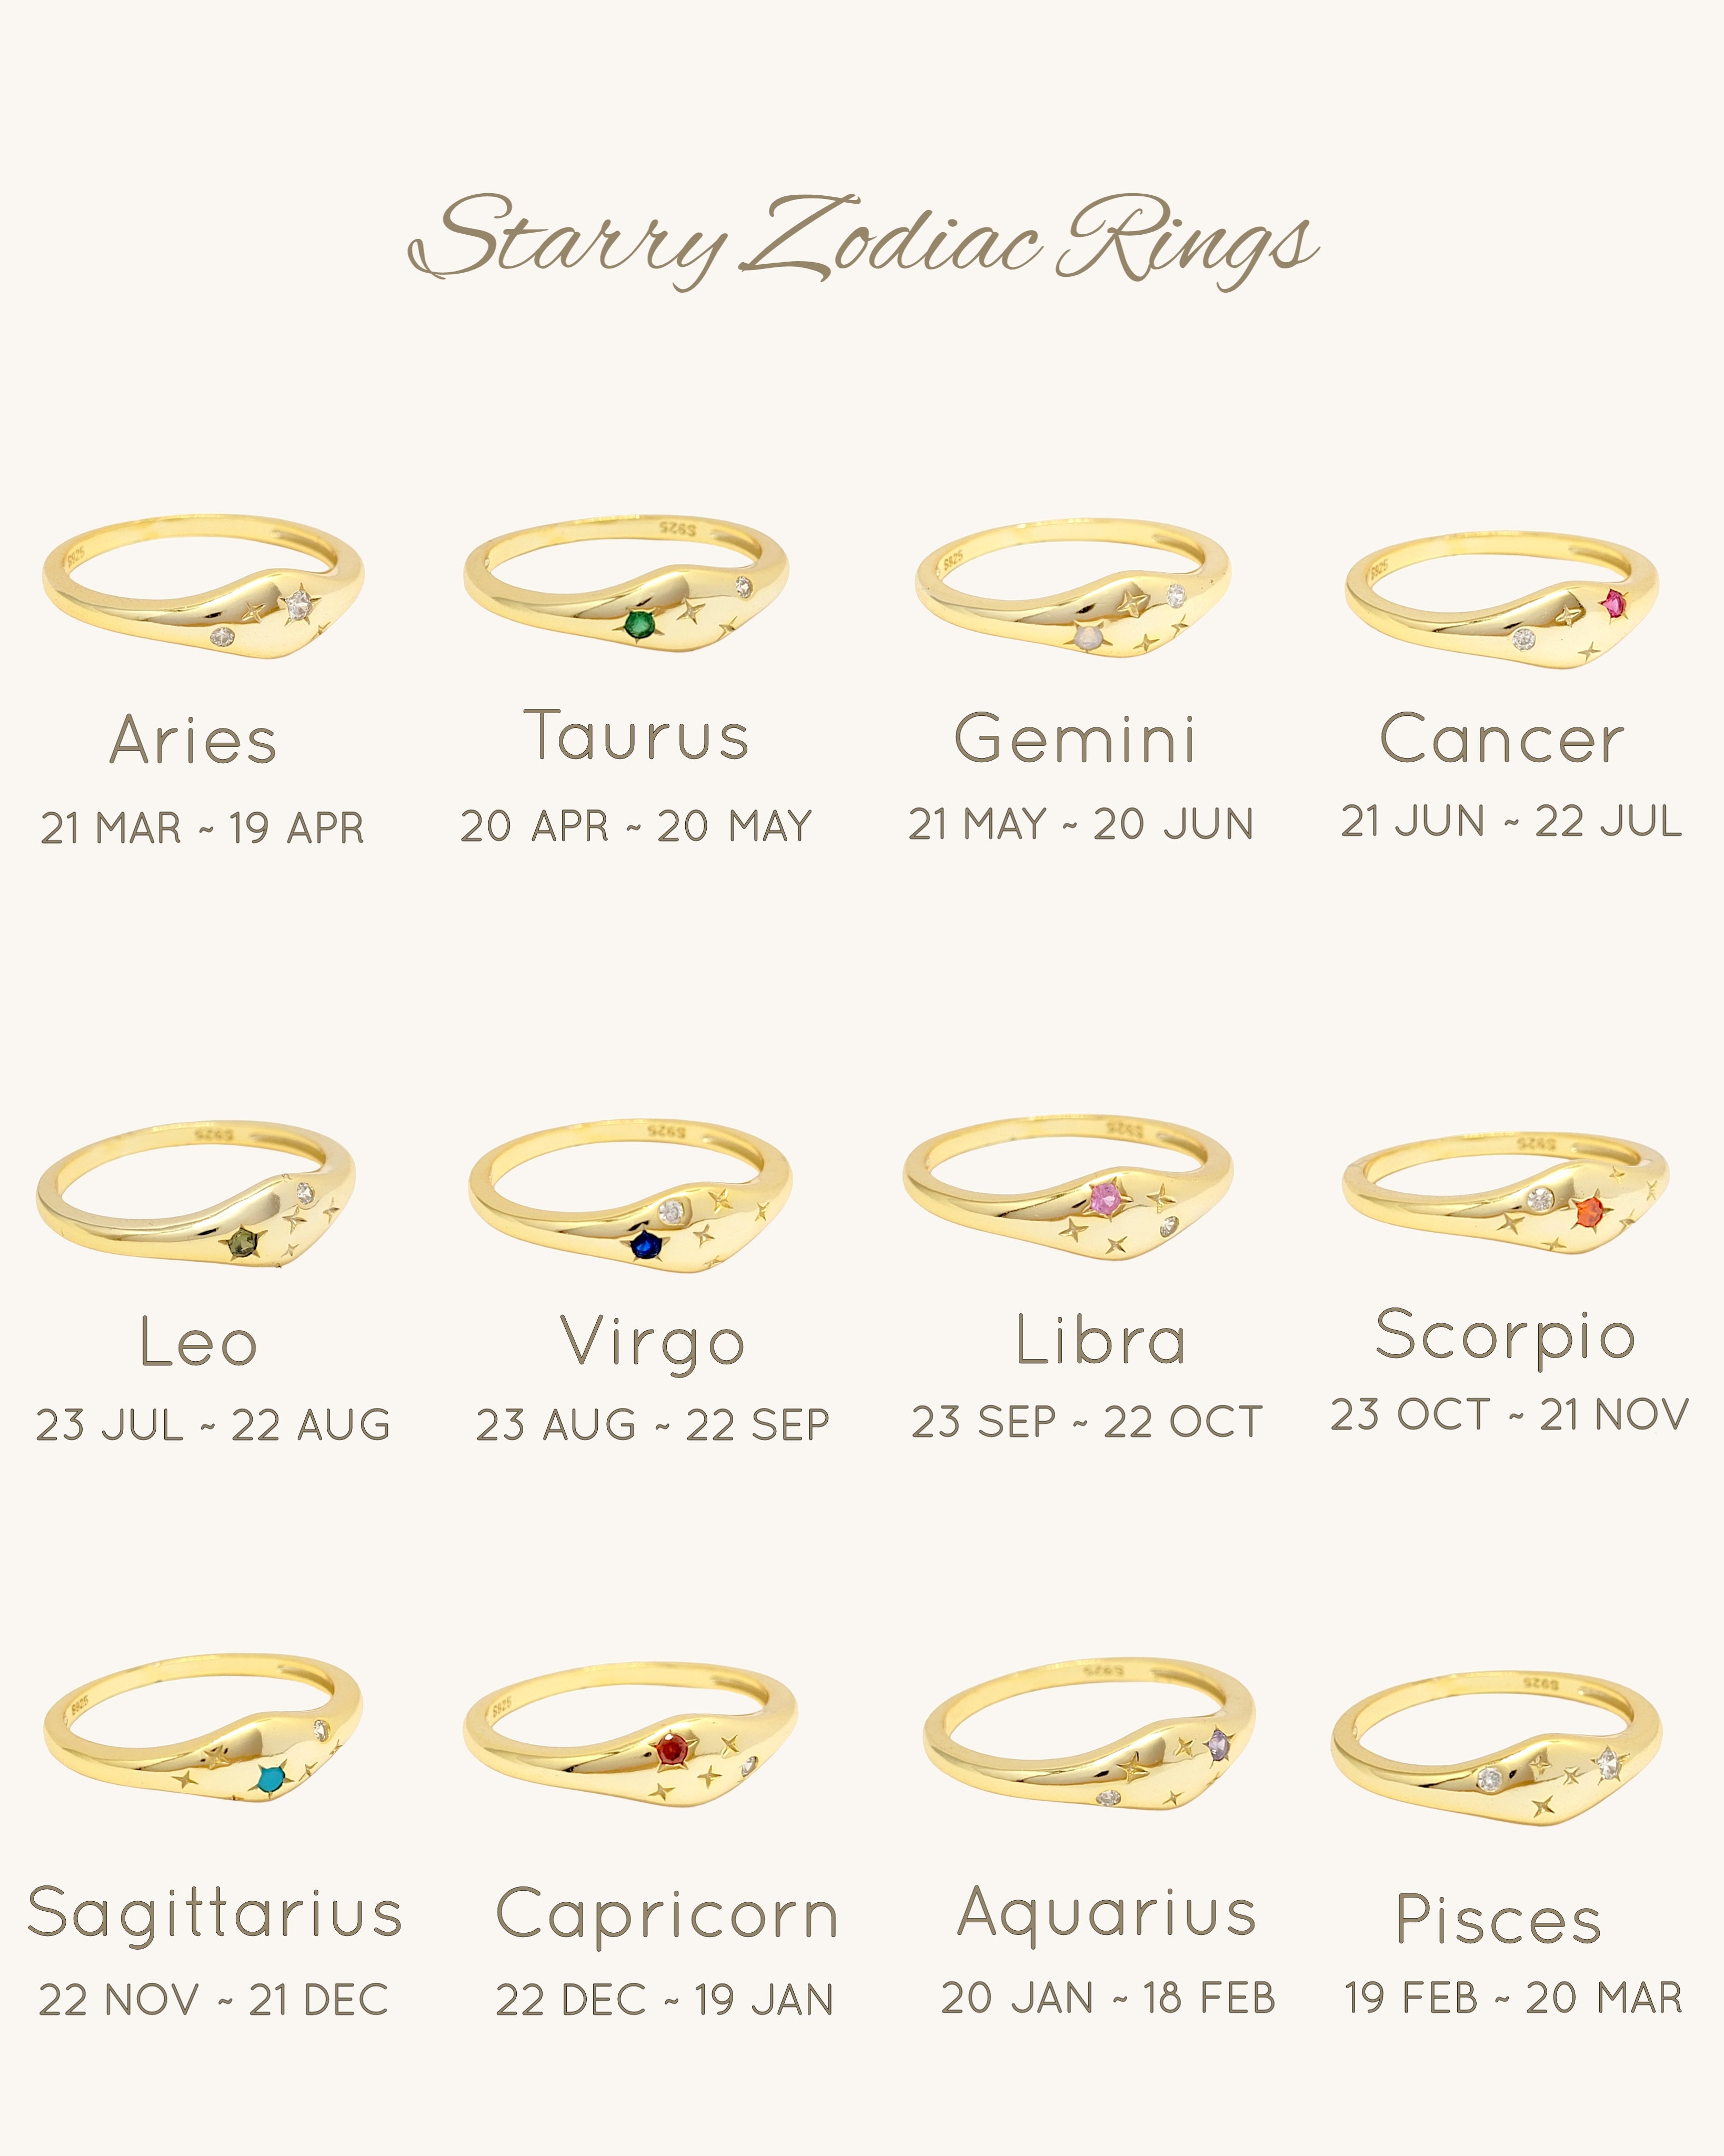 Embrace Your Inner Aries with Our Courageous Aries Ring